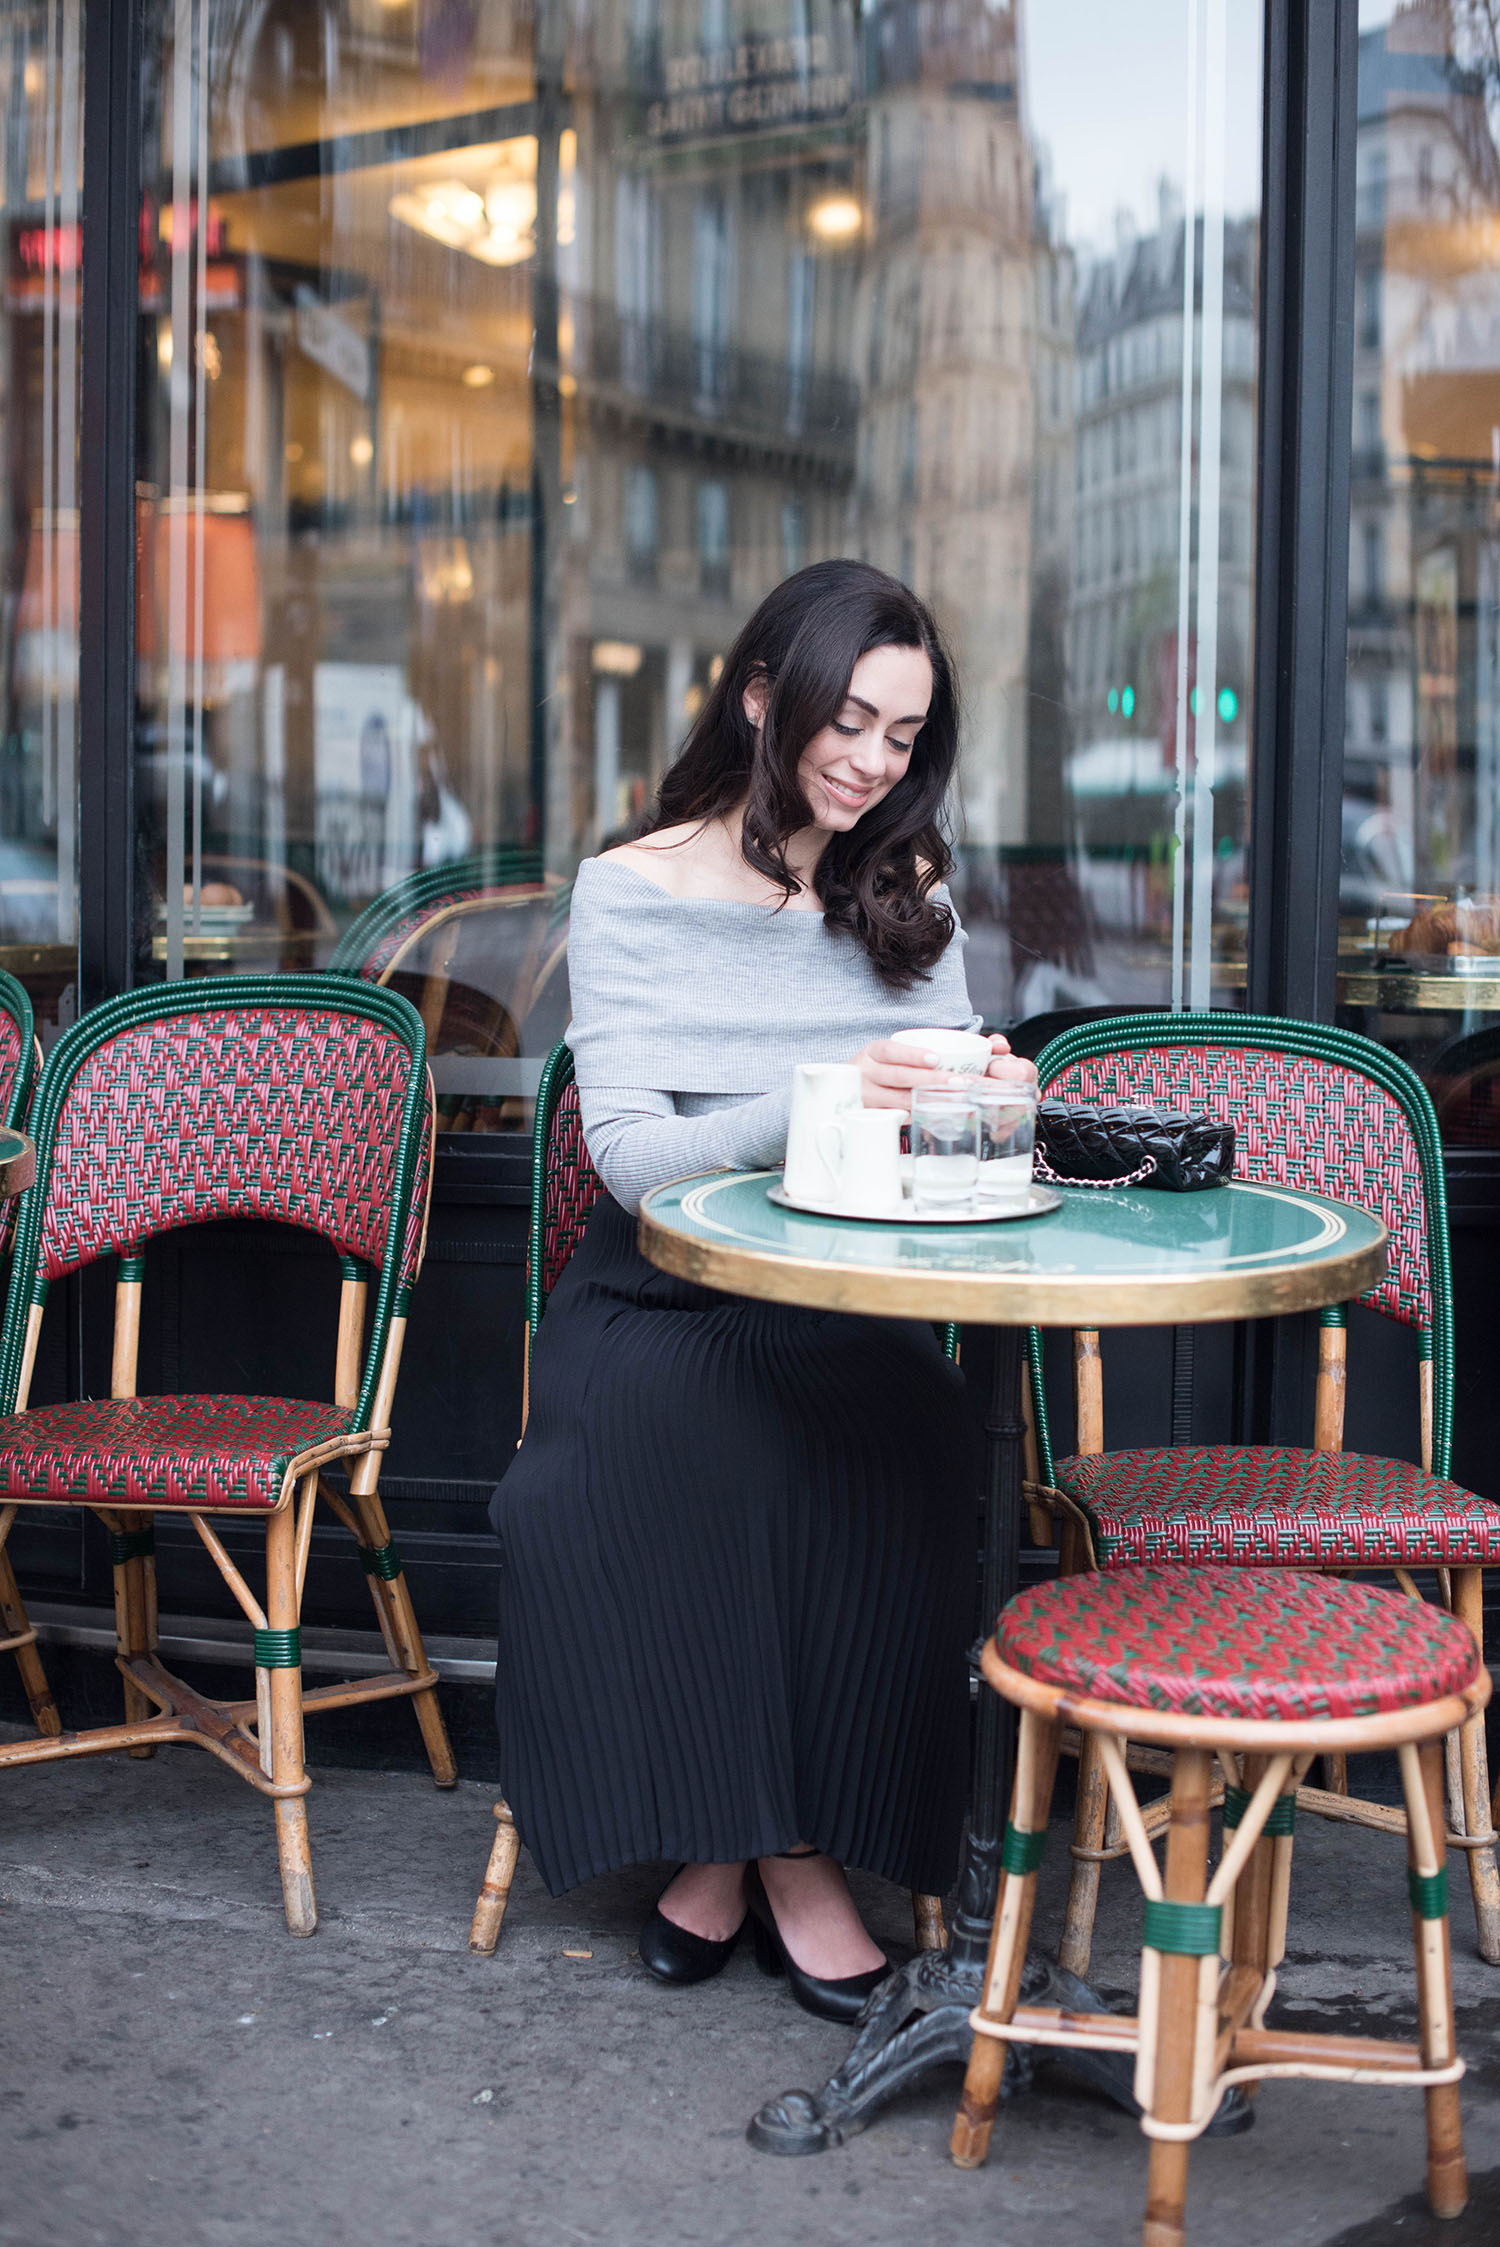 Details of fashion blogger Cee Fardoe of Coco & Vera wearing an Aritzia off-shoulder sweater at the Cafe de Flore in Paris